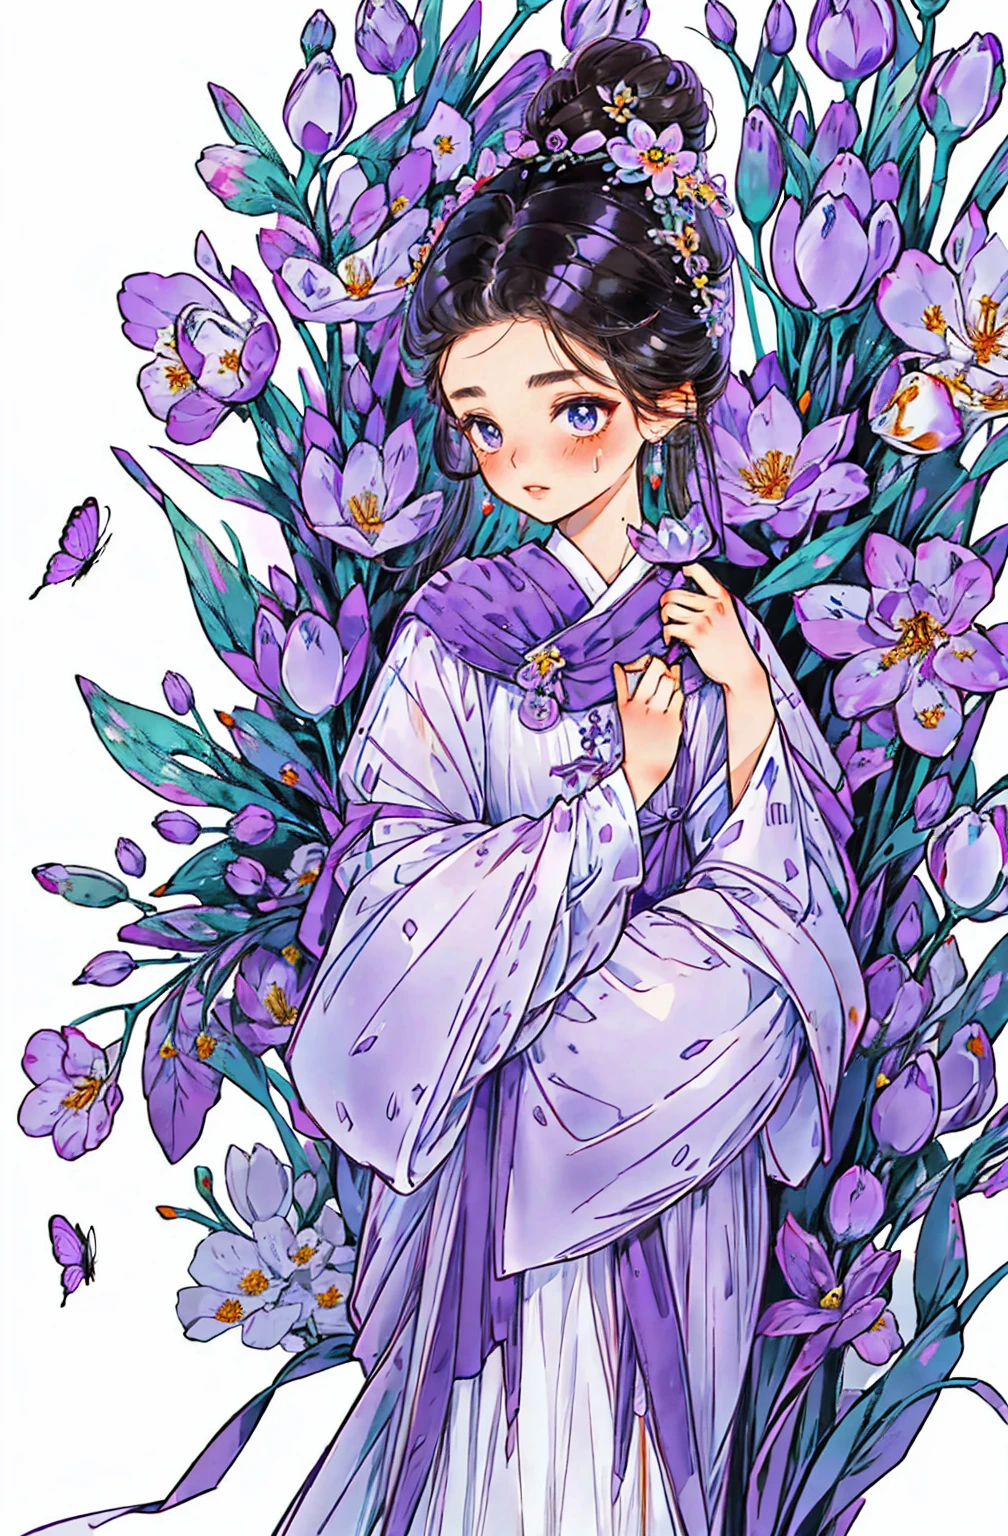 1 sister, alone, looking at the audience, Blushed, background with, black hair color hair, hair accessories, long sleeve, White background, Everlasting, Full body female love, flowers bloom, Purple, hair flower, bun, Butterfly, masterpiece, recent quality, best details, clear facial features, beautiful eyes